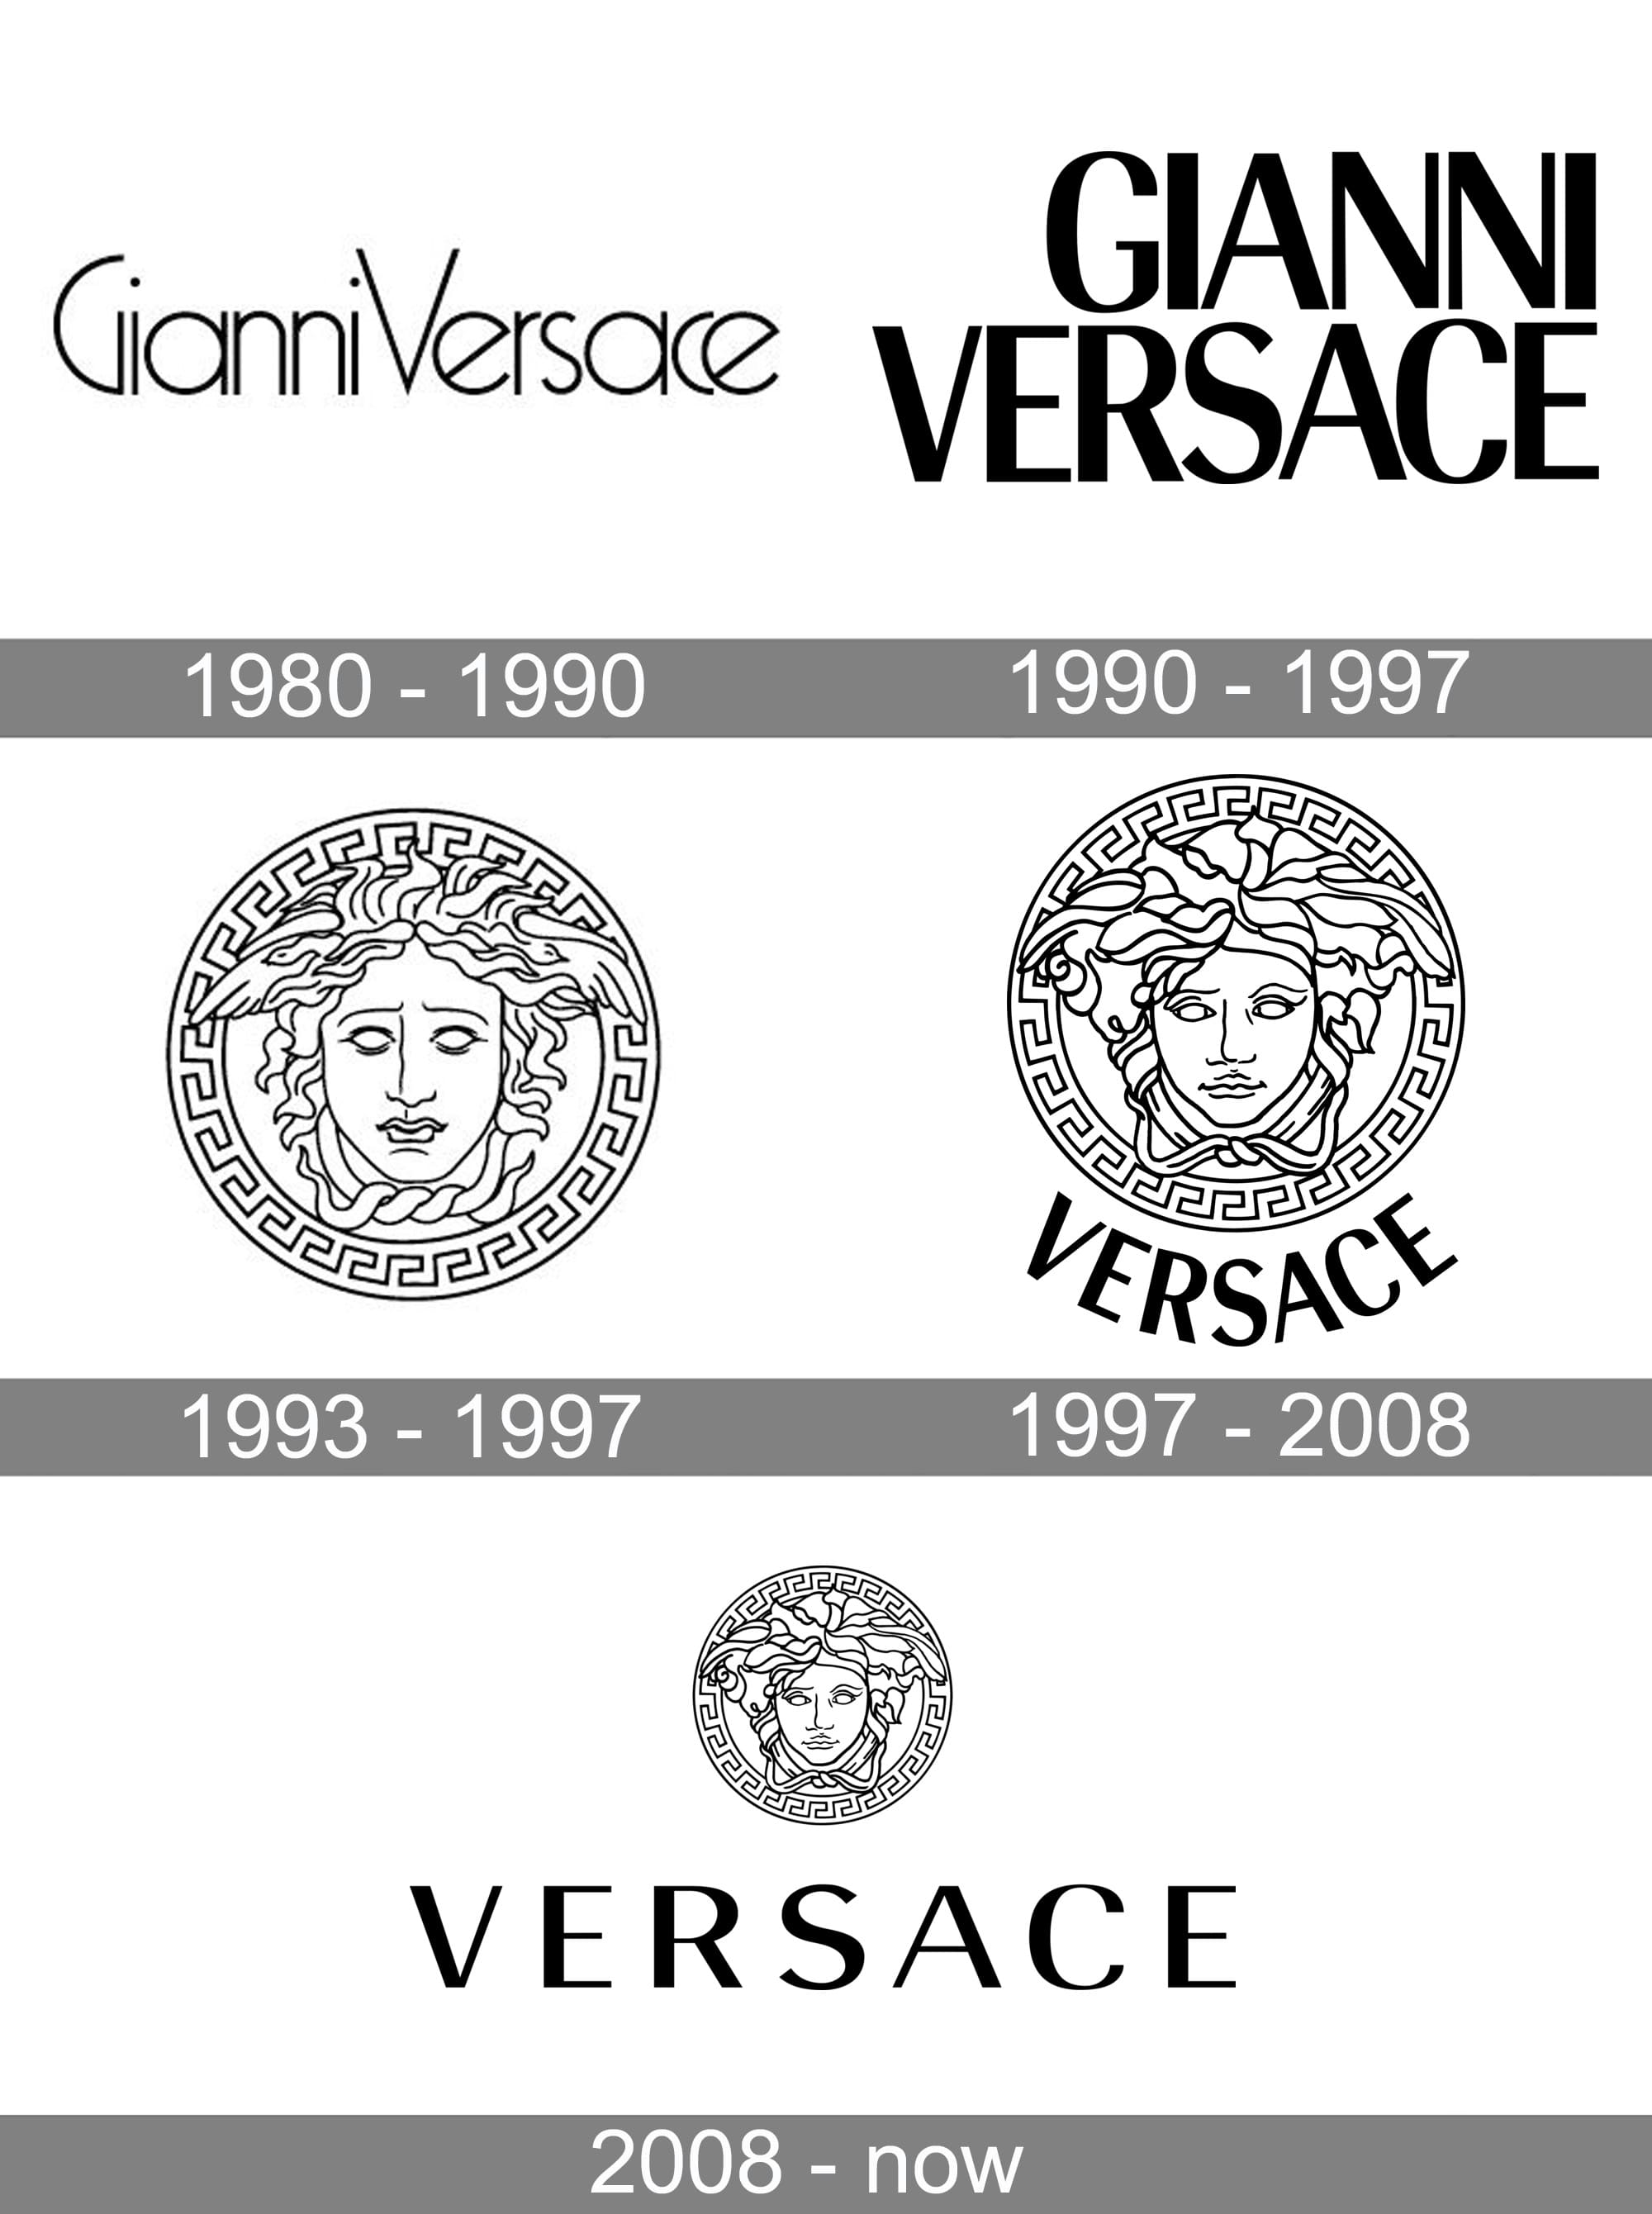 The evolution of Versace